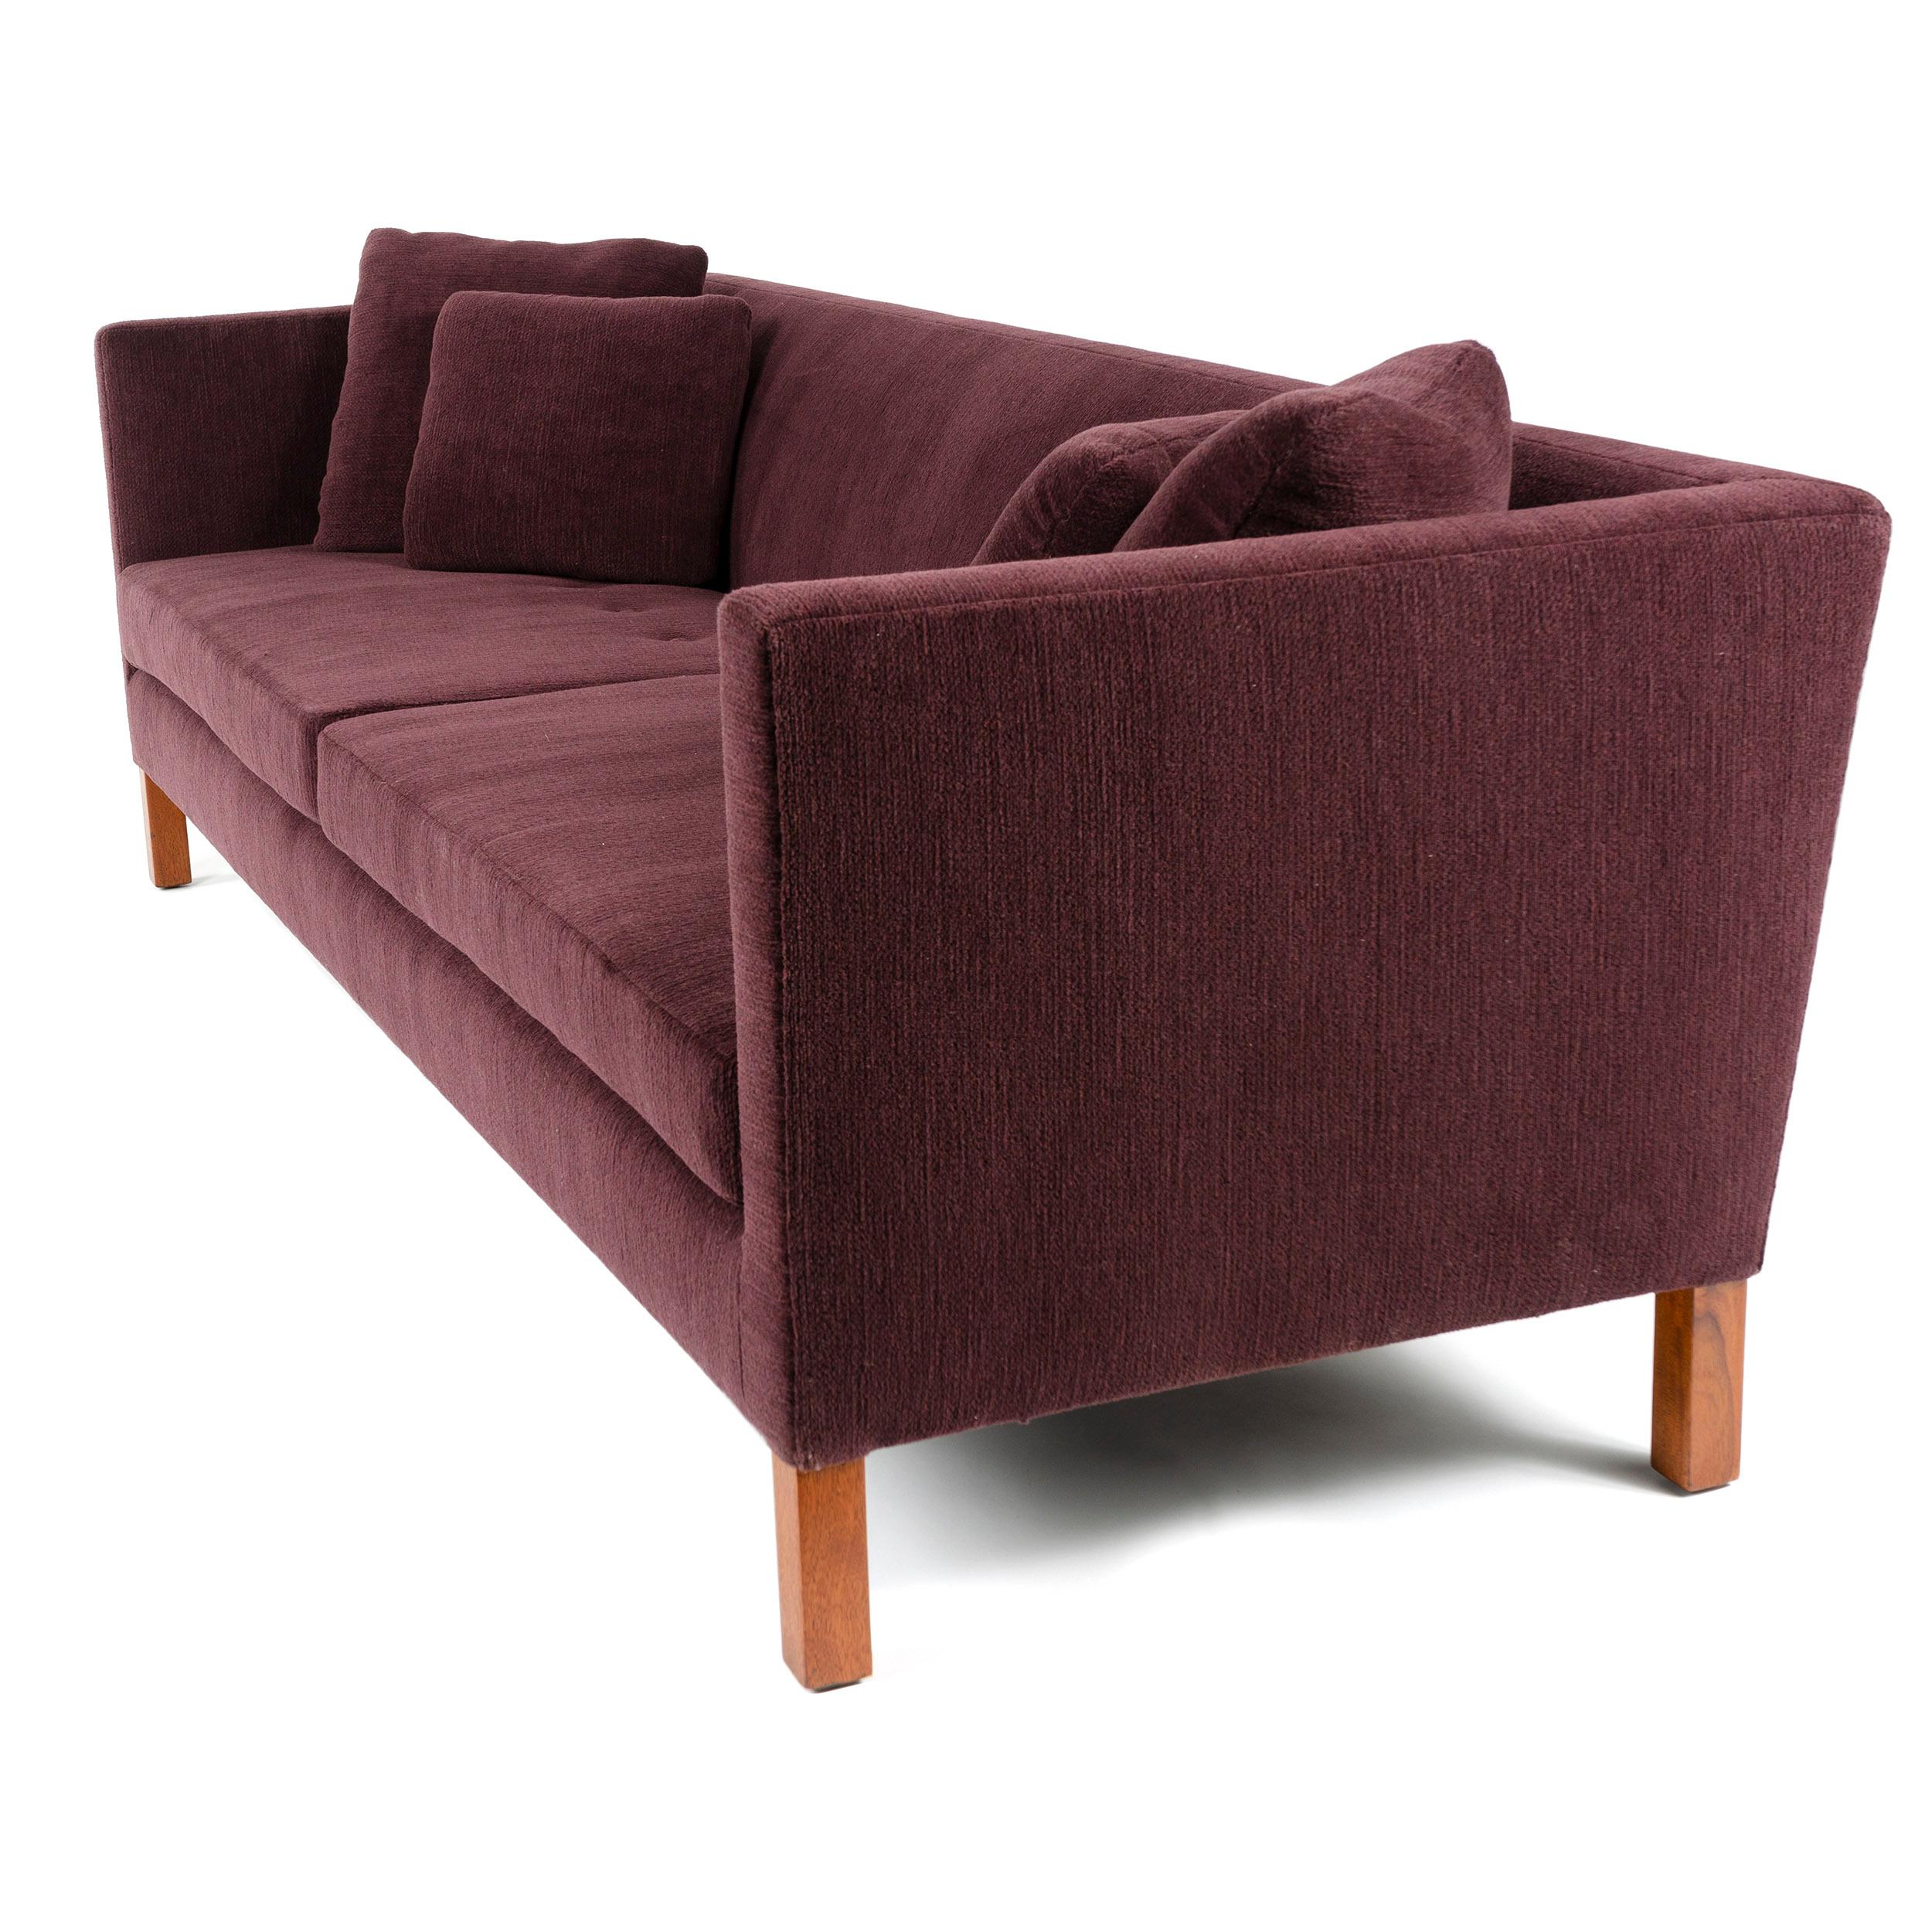 Mid-Century Modern Upholstered Square Arm Sofa by Edward Wormley for Dunbar